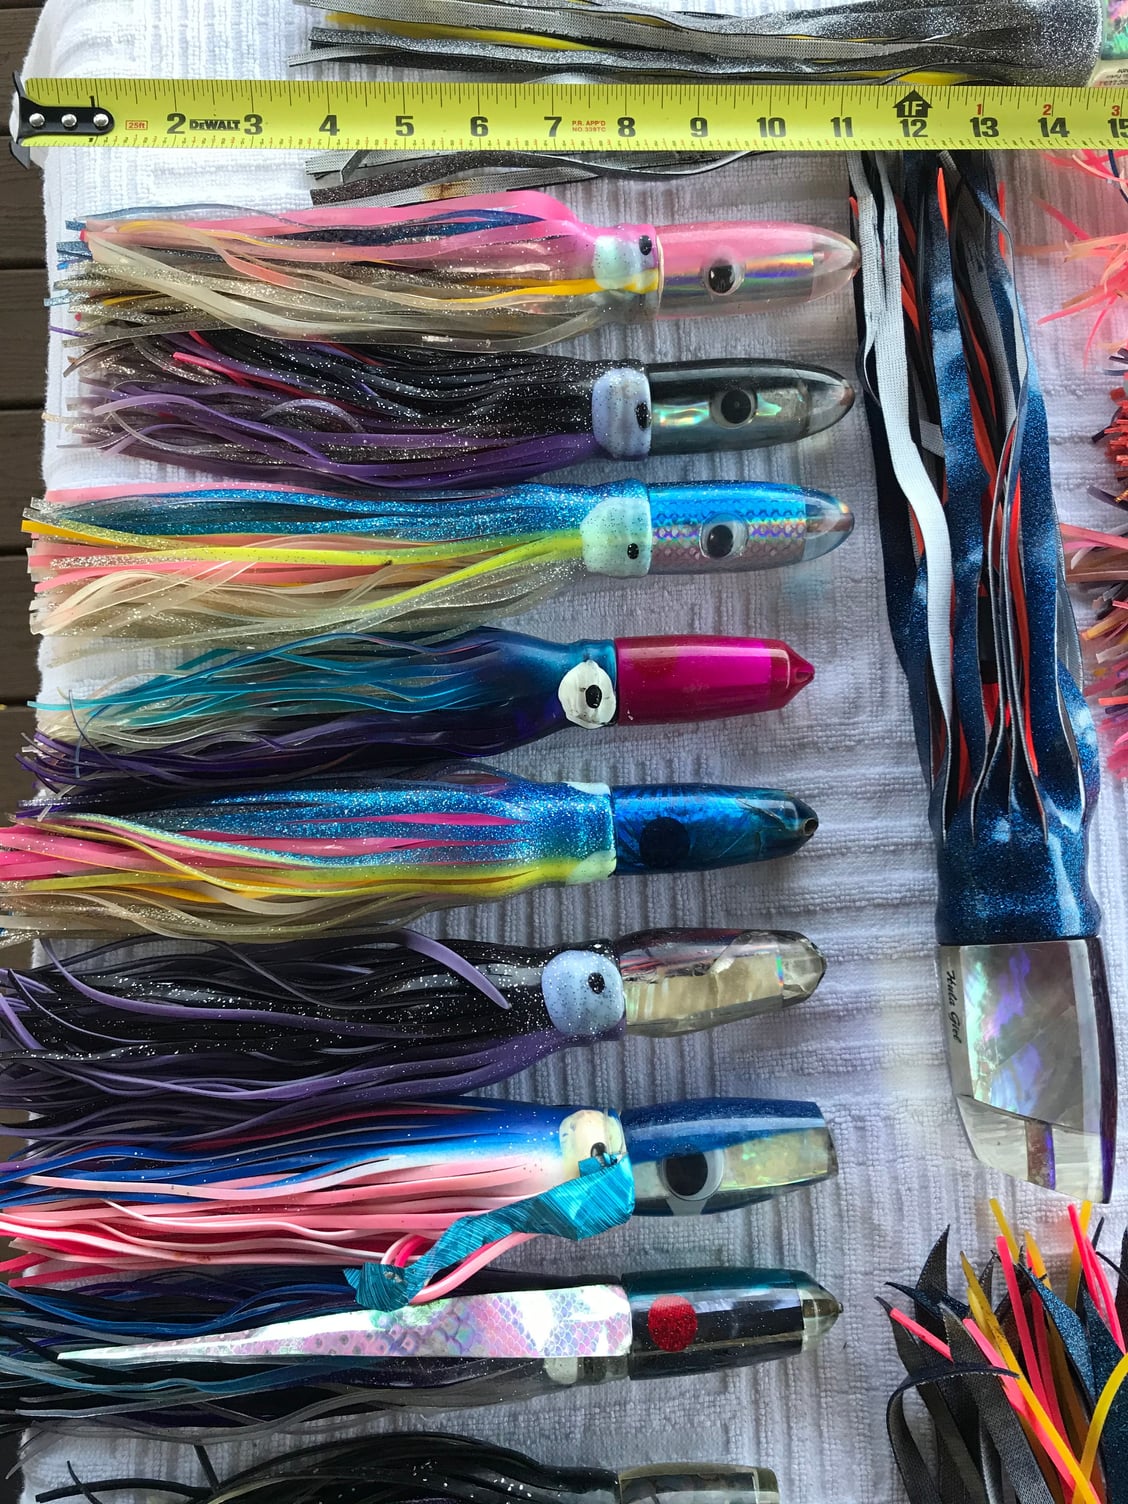 Big game trolling lures - The Hull Truth - Boating and Fishing Forum